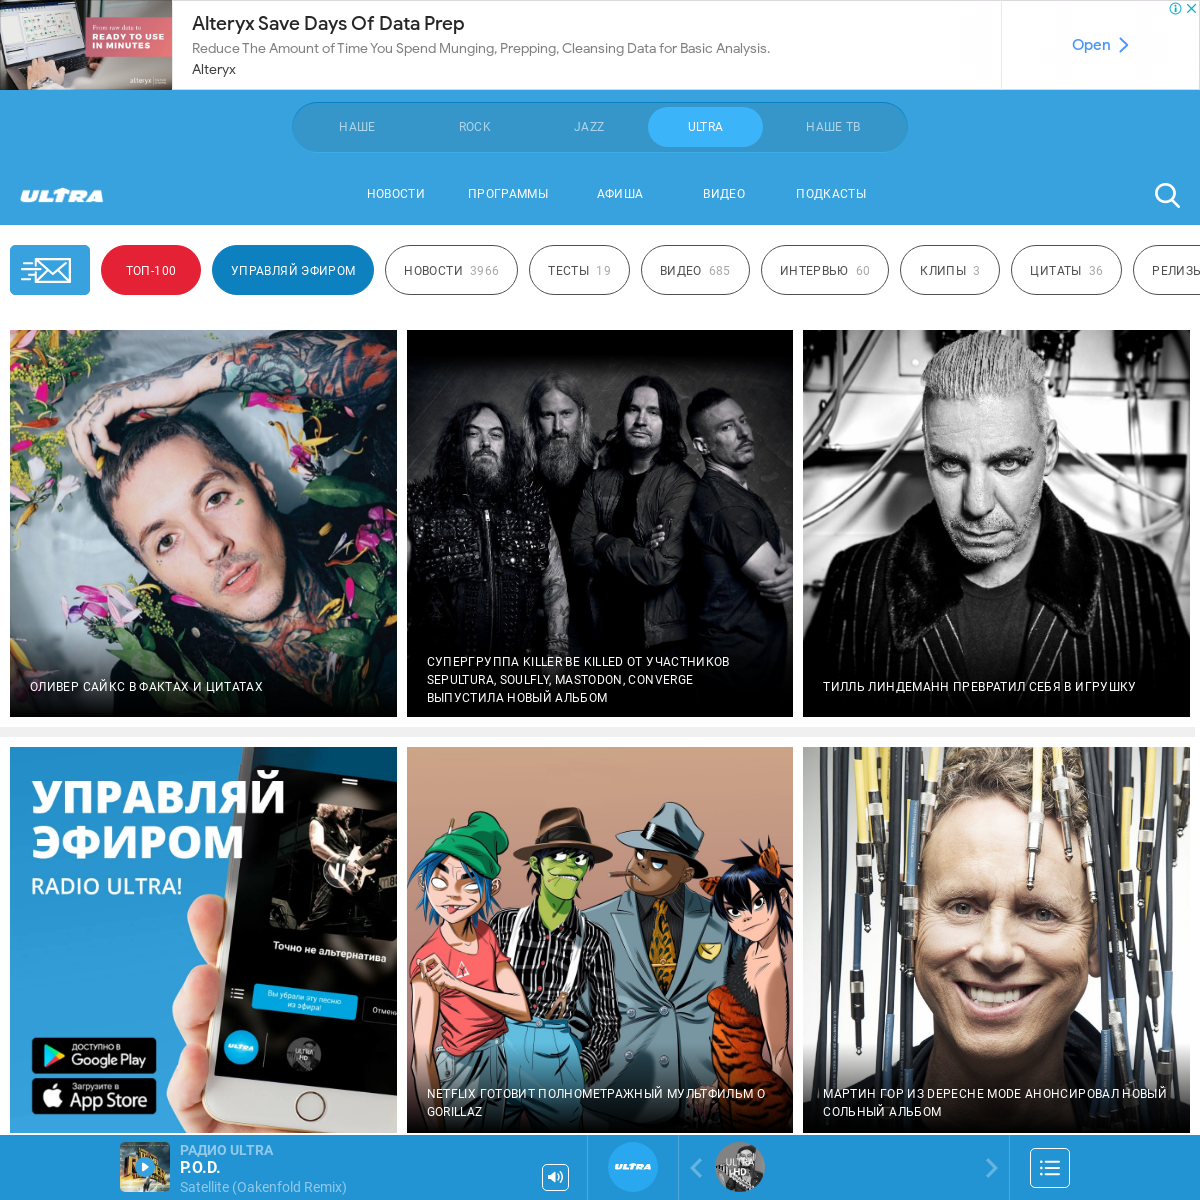 A complete backup of radioultra.ru